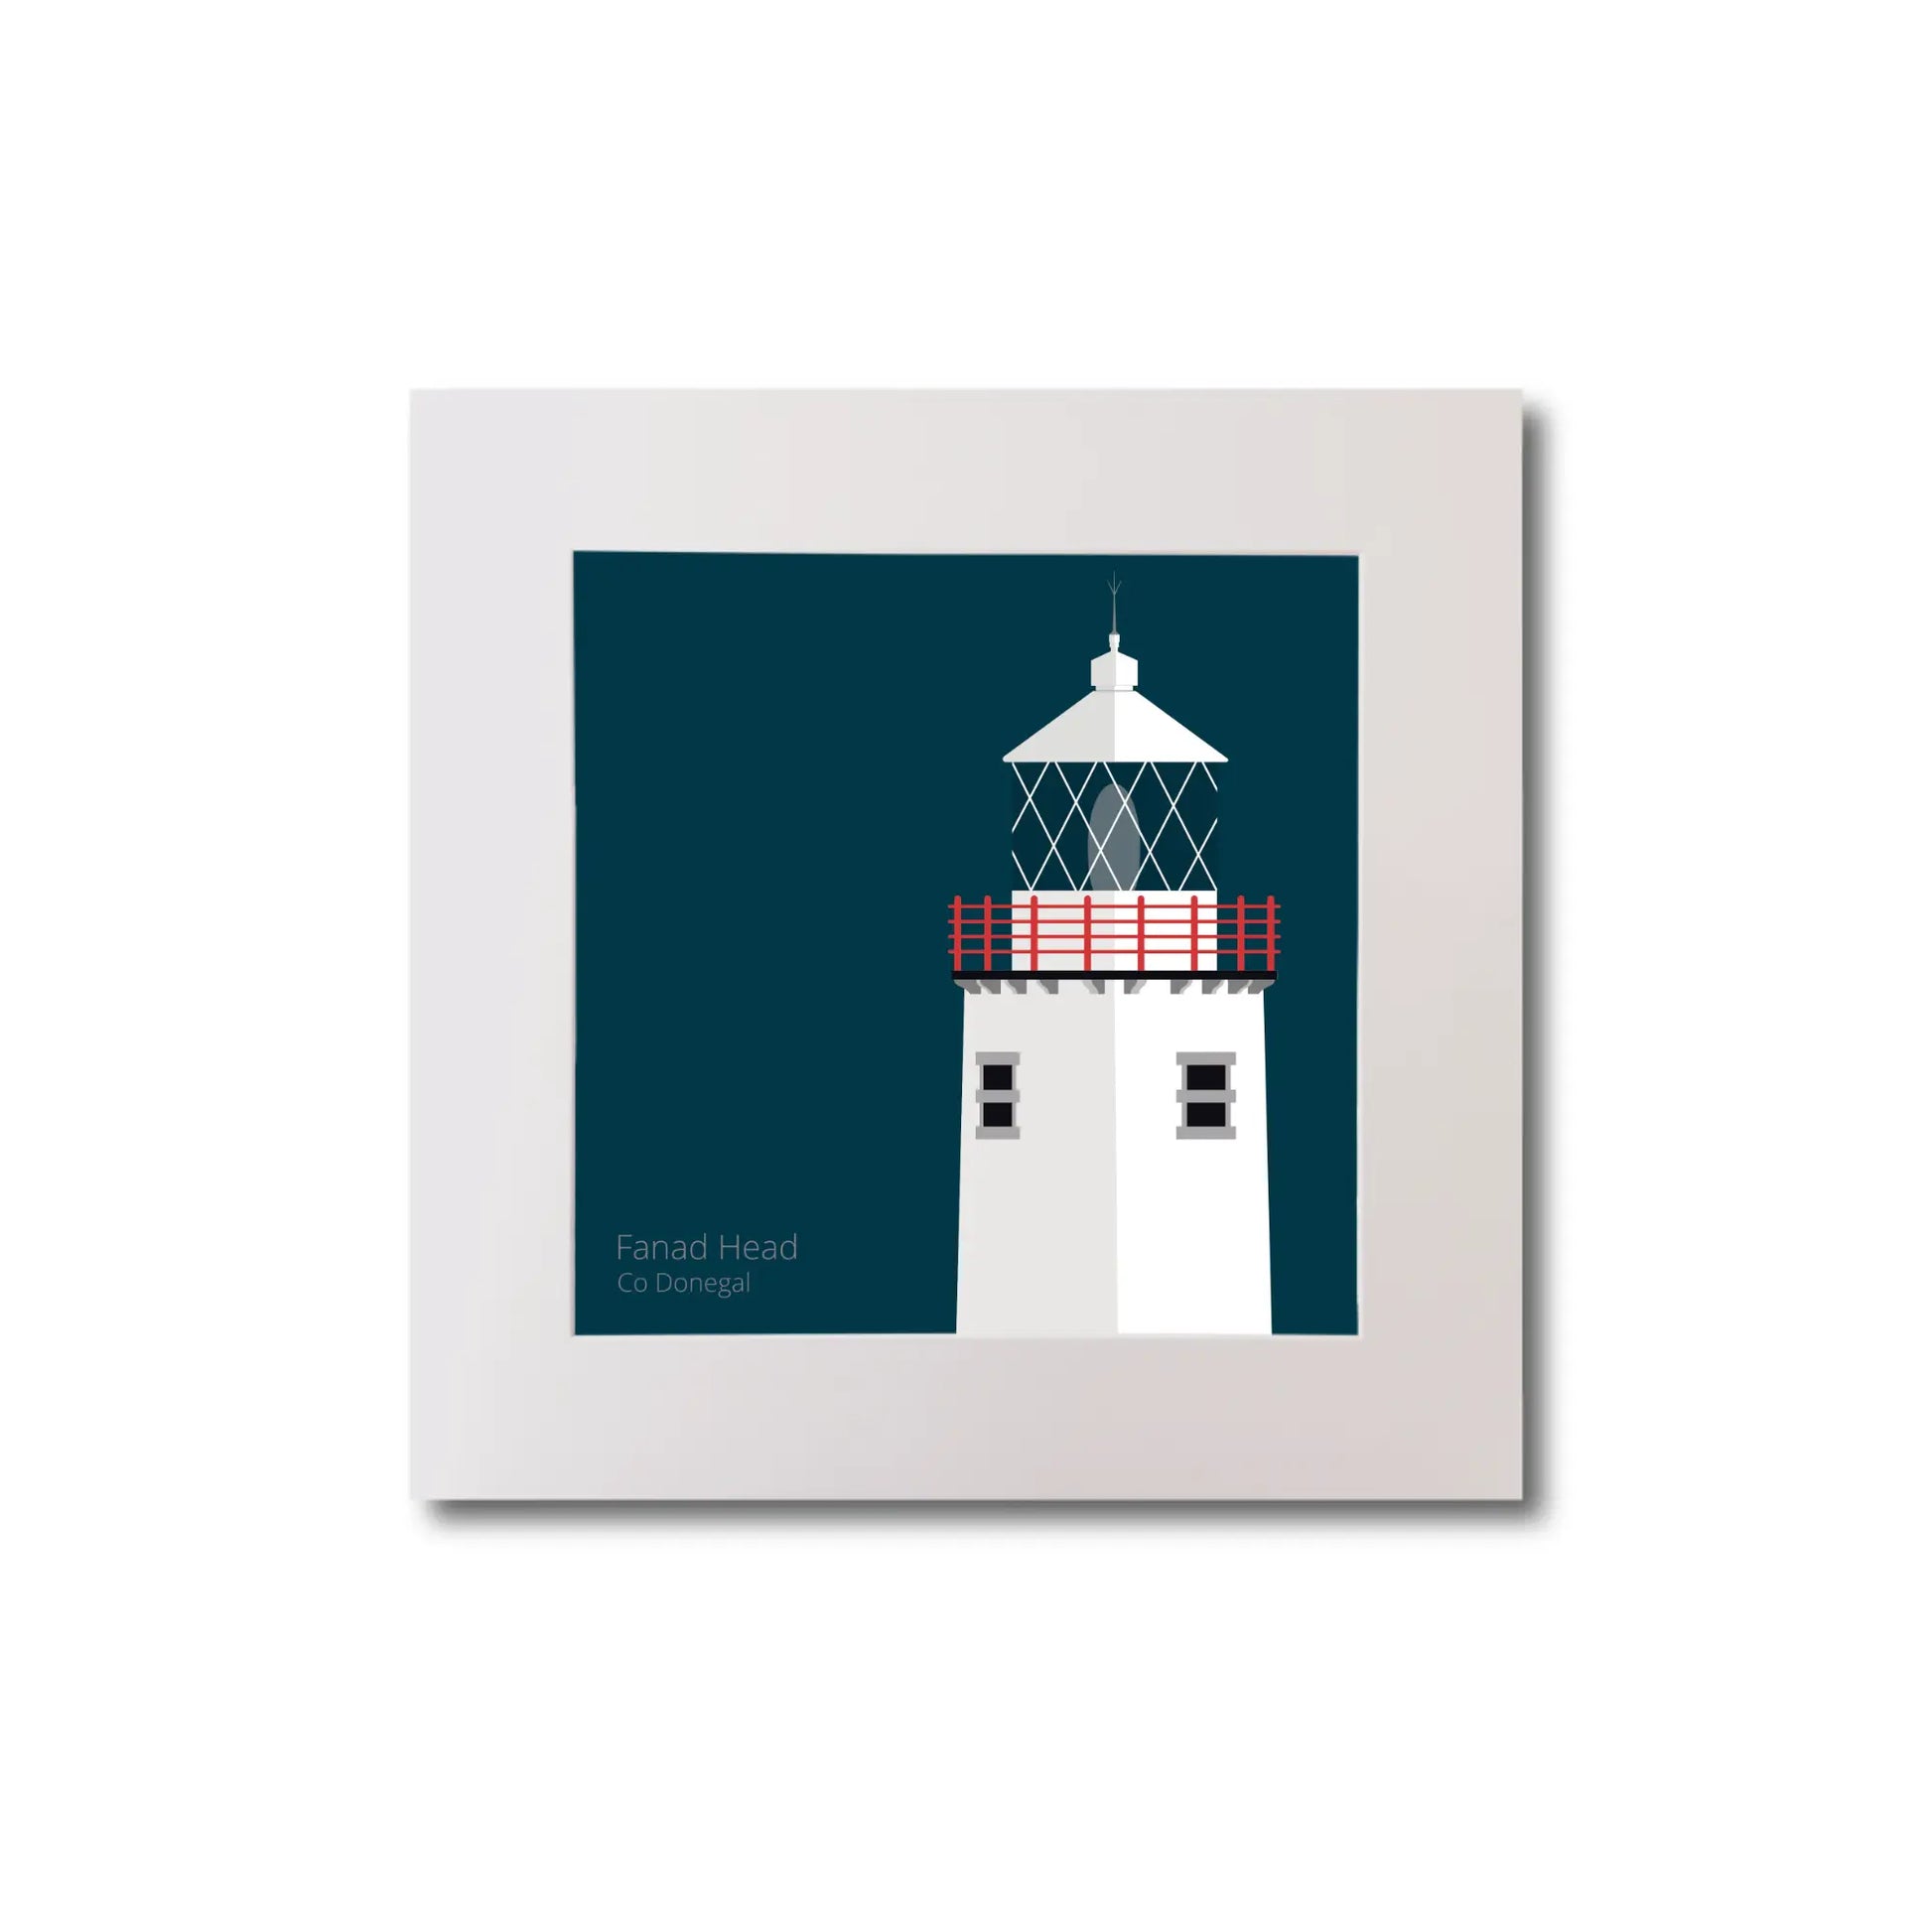 Illustration of Fanad Head lighthouse on a midnight blue background, mounted and measuring 20x20cm.